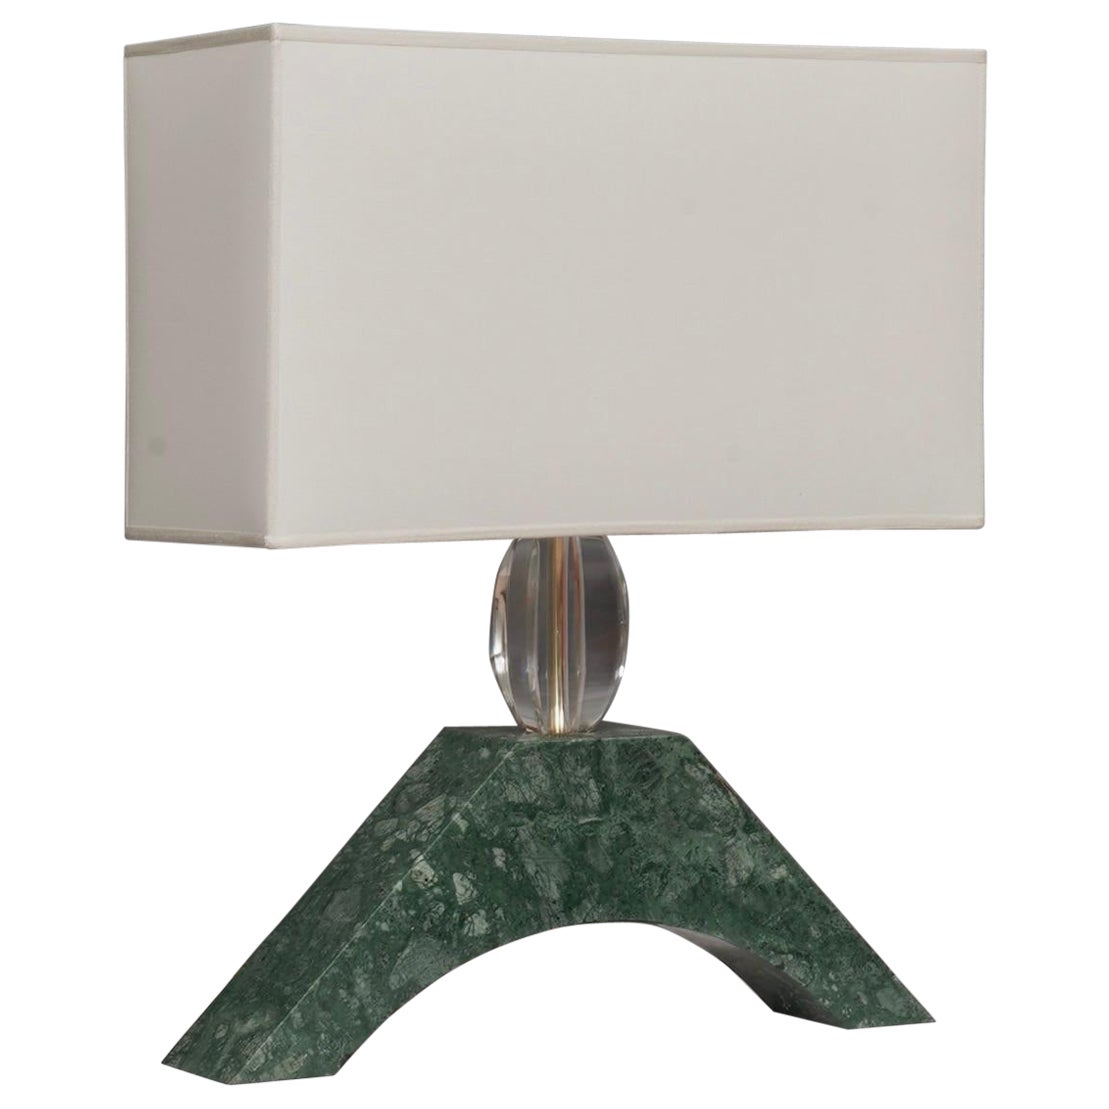 Indian Green Marble and Murano Glass Table Lamp, 2000 For Sale